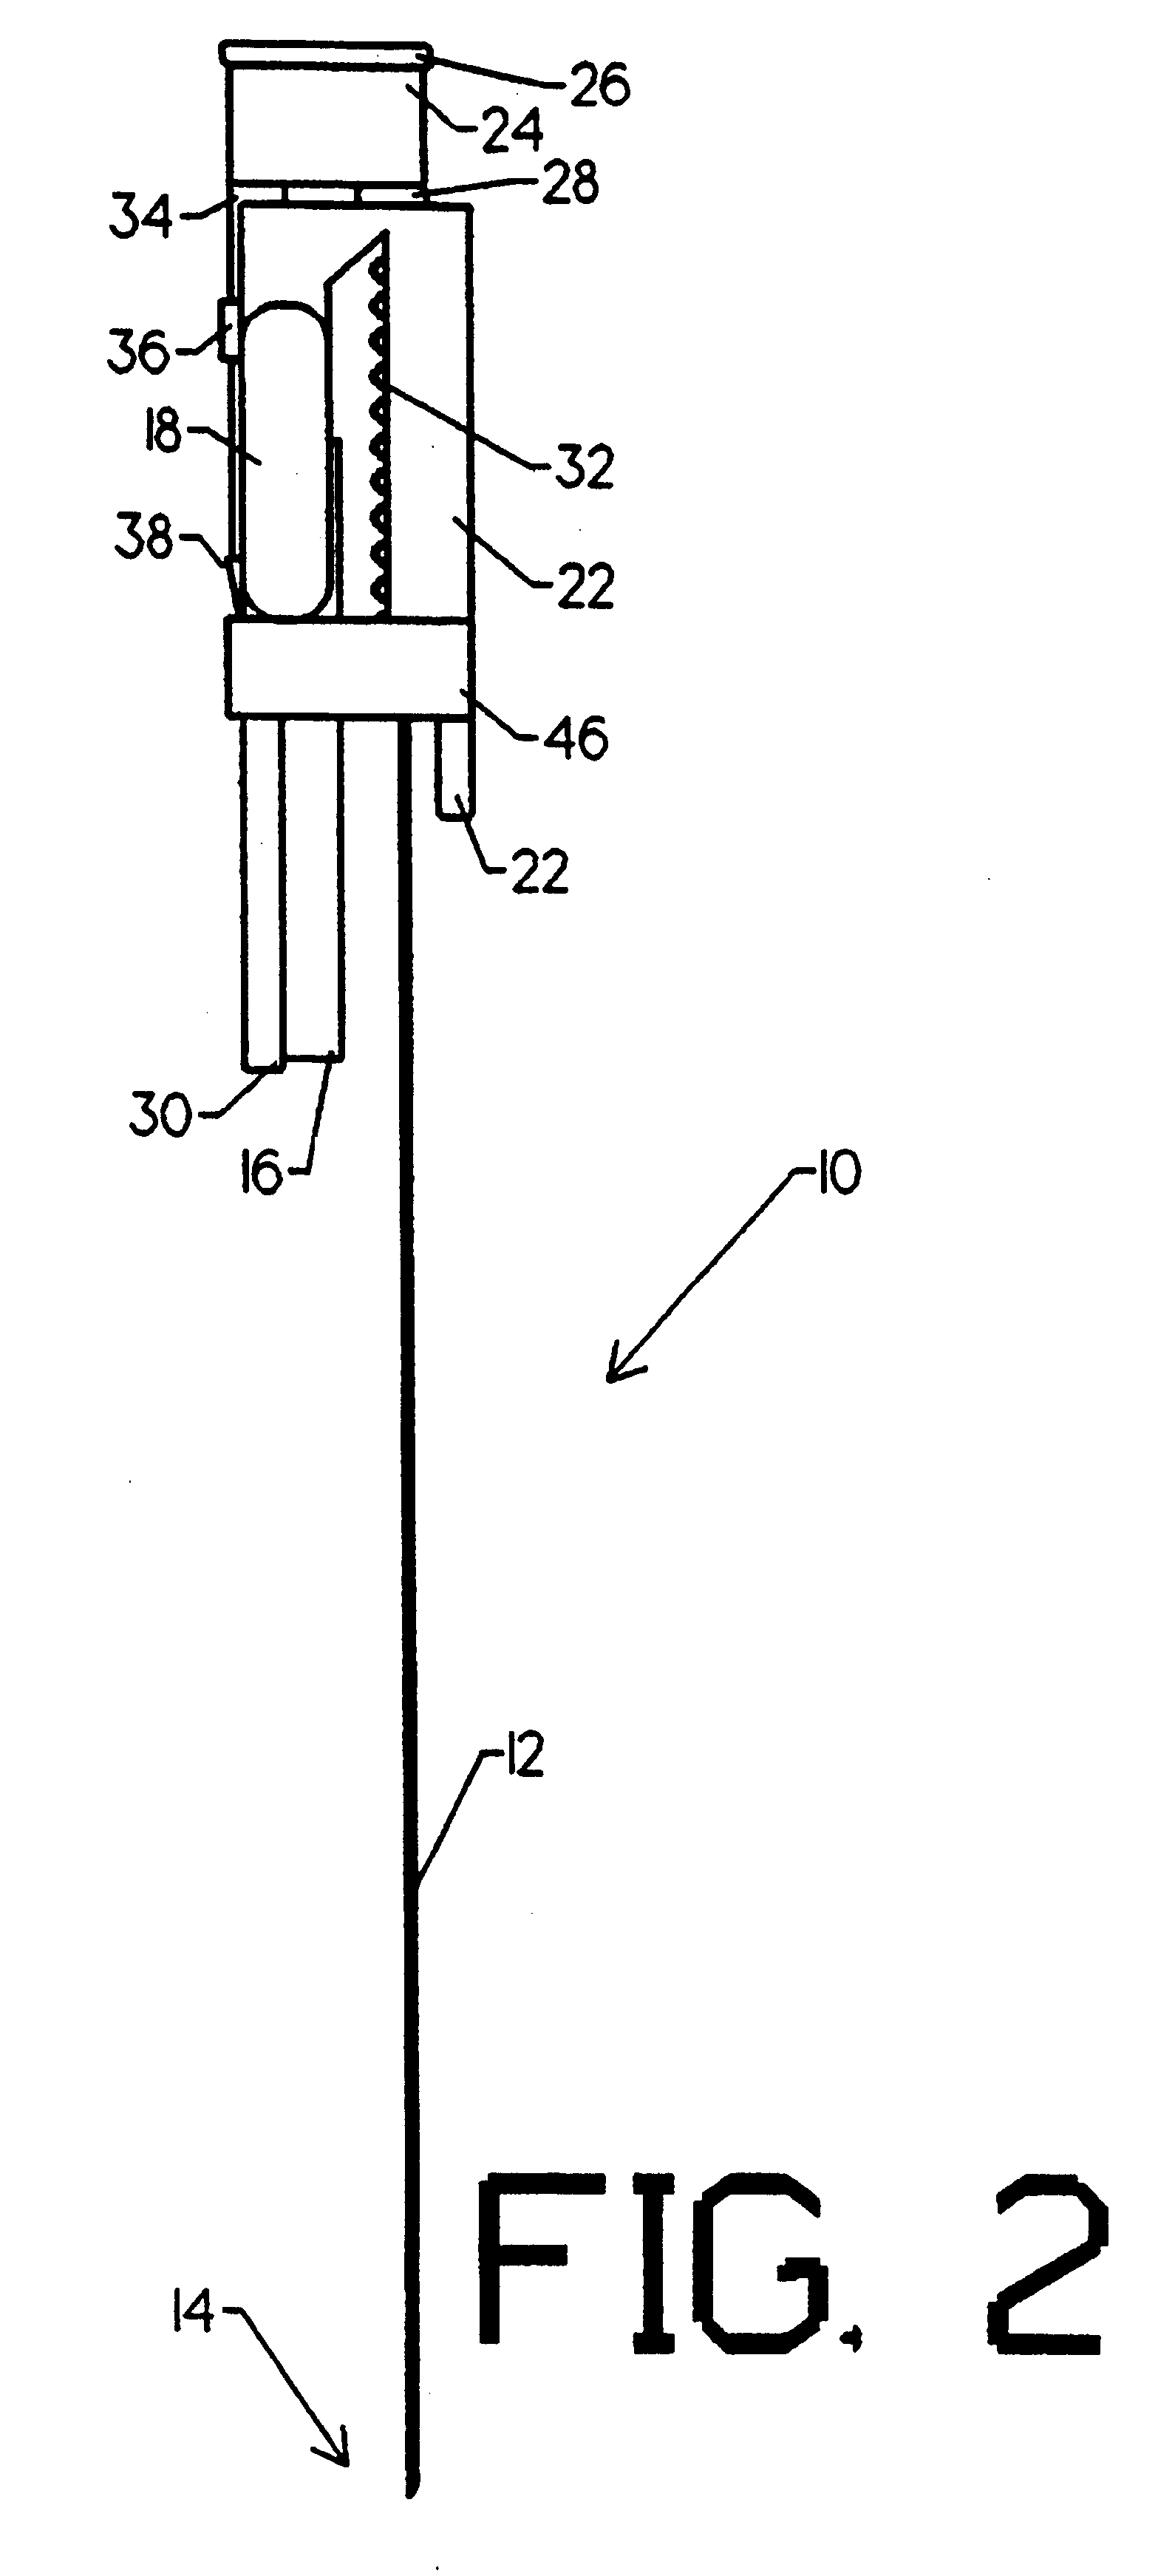 Surgical biopsy instrument